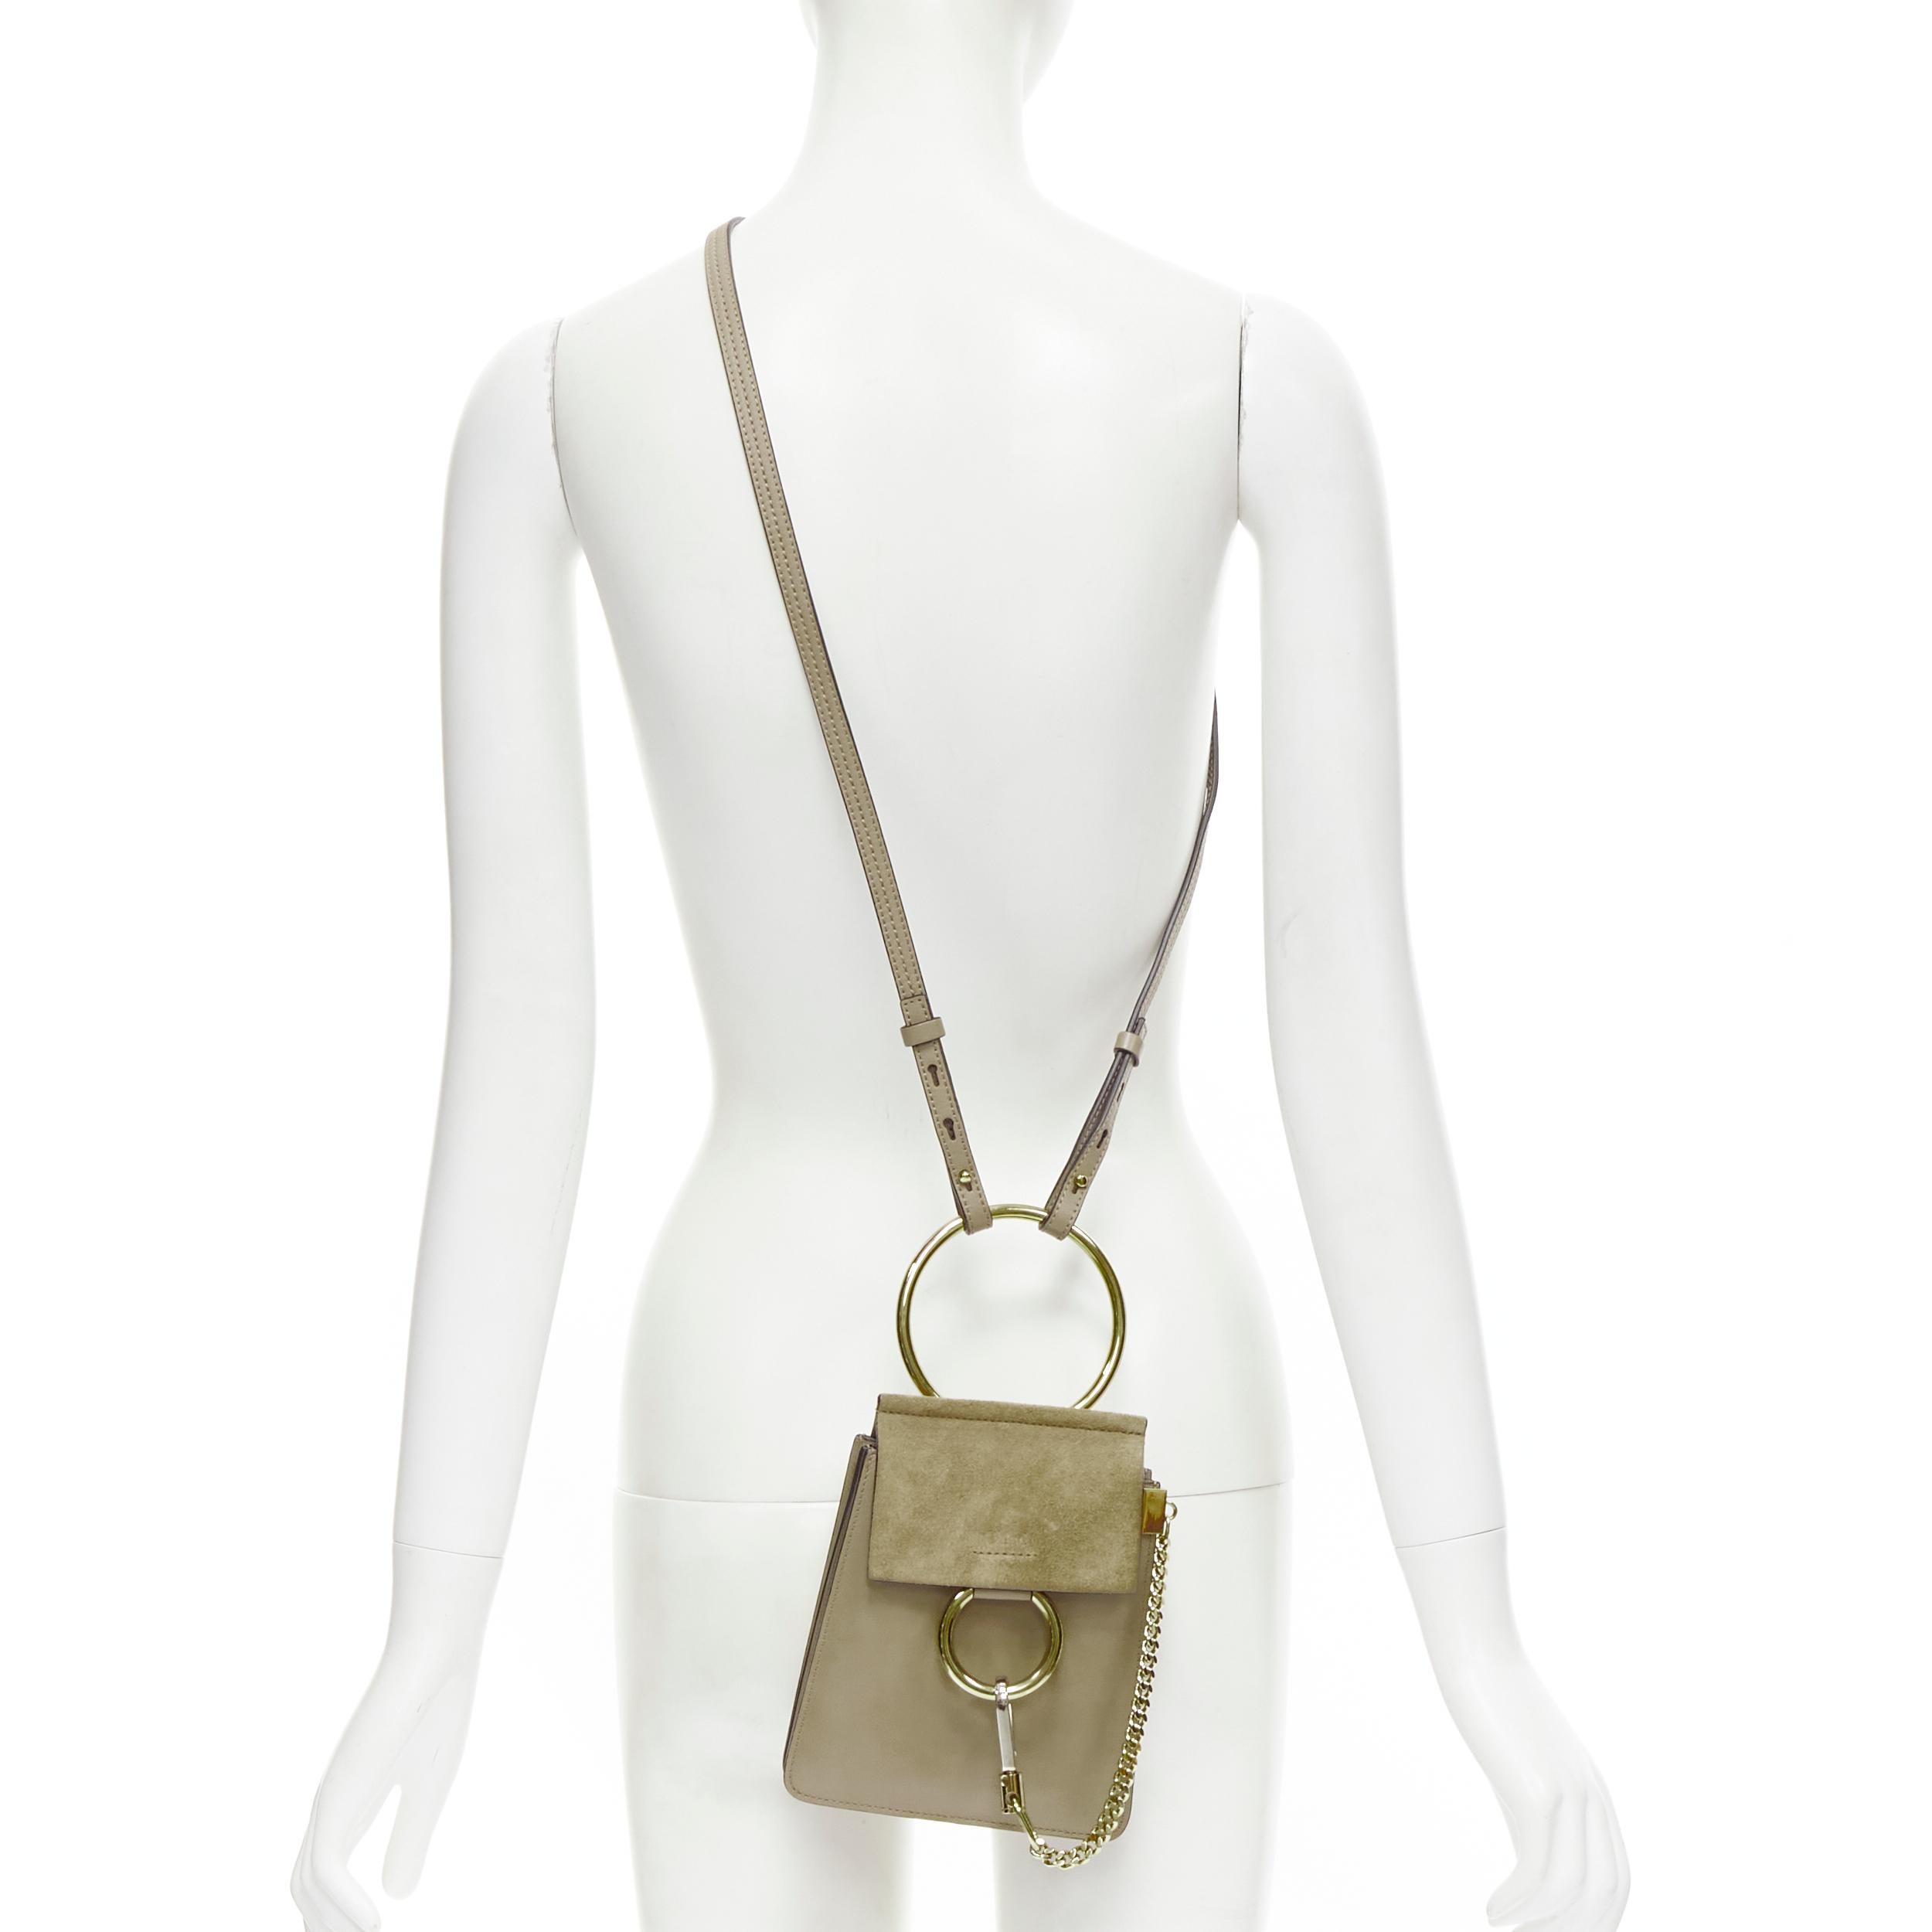 CHLOE Faye gold bangle bracelet ring chained crossbody grey suede leather bag 
Reference: JECN/A00020 
Brand: Chloe 
Model: CHC17WS320H2O23W 
Material: Suede 
Color: Grey 
Pattern: Solid 
Closure: Button 
Estimated Retail Price: US $1110 
Made in: